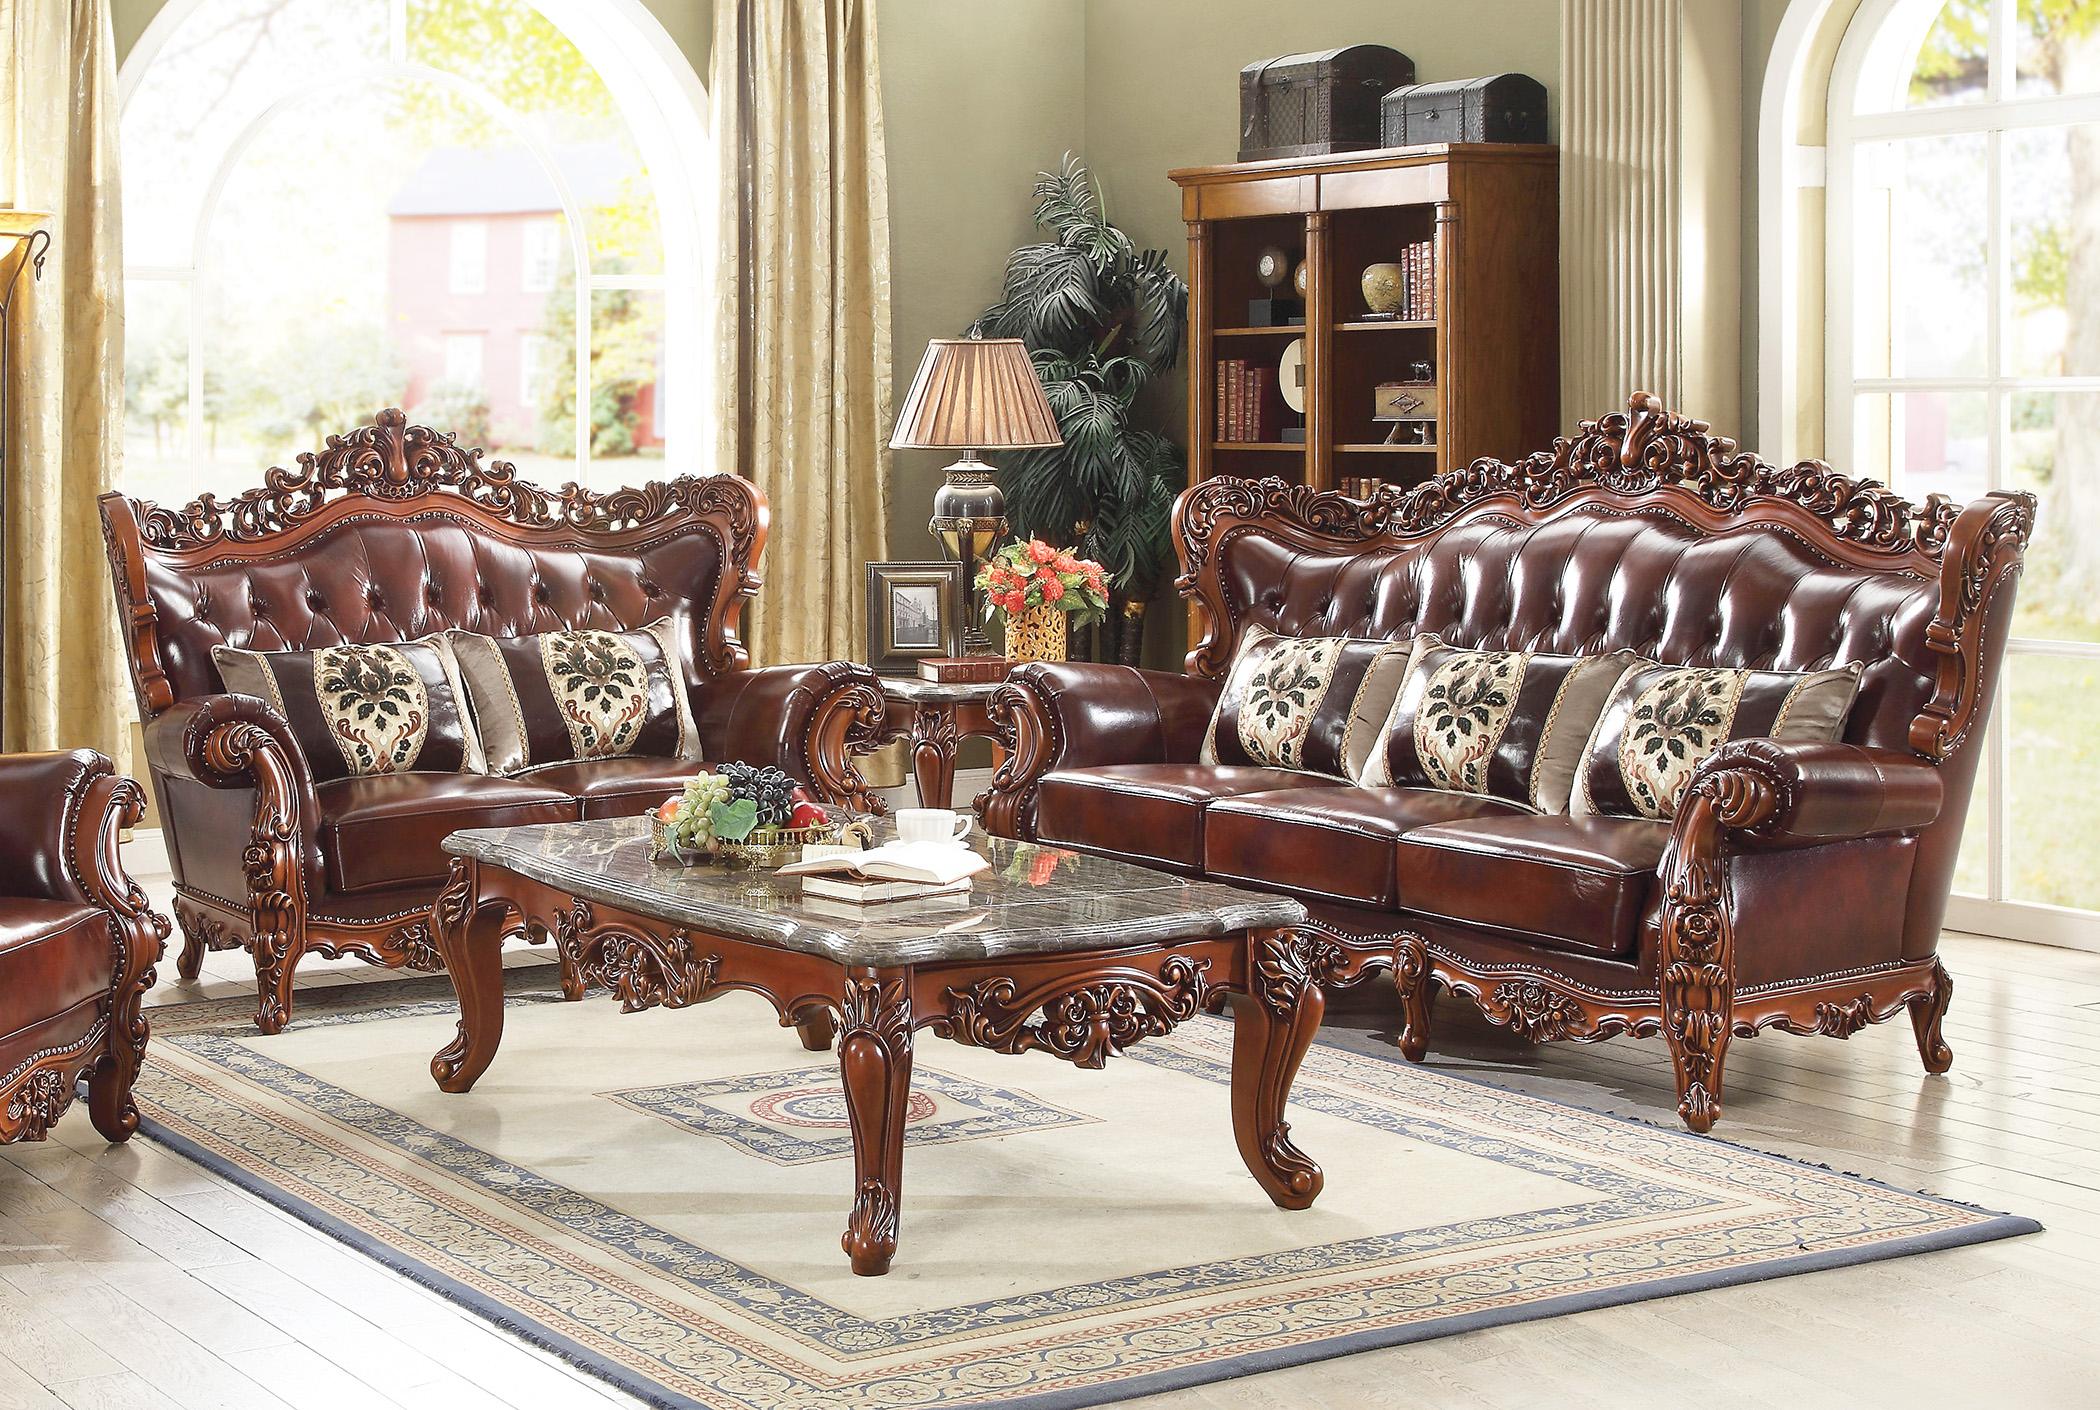 Classic, Traditional Sofa and Loveseat Set Eustoma-53065 Eustoma-53065-Set-2 in Cherry, Walnut Top grain leather